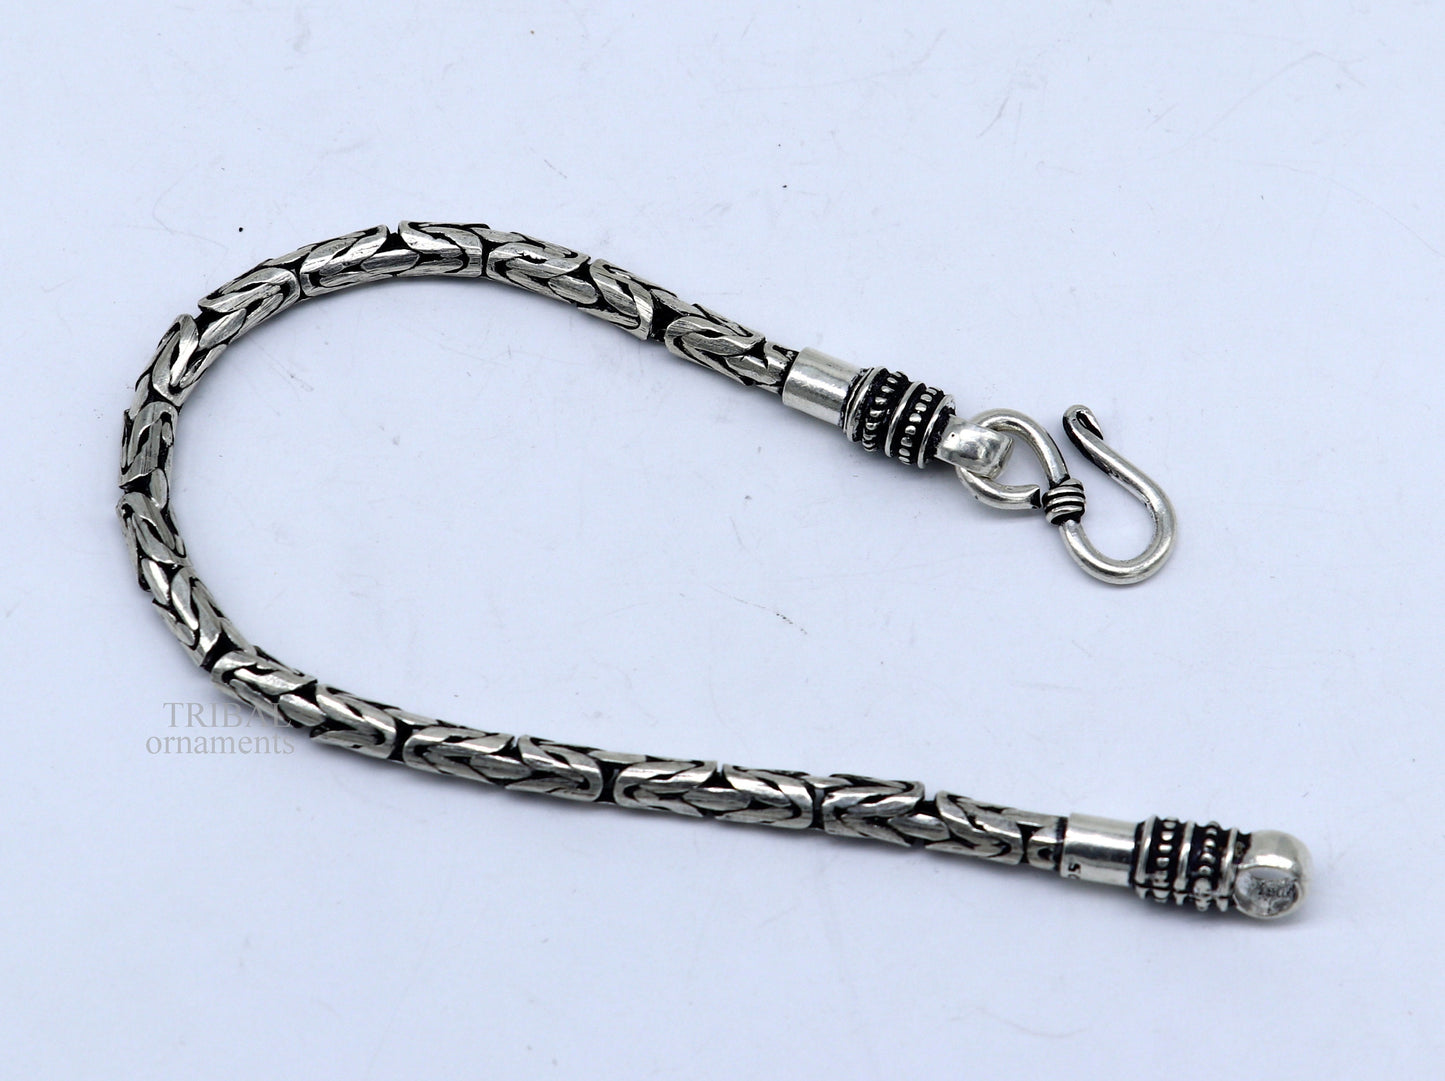 All size 4MM vintage style handmade solid 925 sterling silver bracelet unisex gifting tribal stylish jewelry for men's and women's Rsbr369 - TRIBAL ORNAMENTS